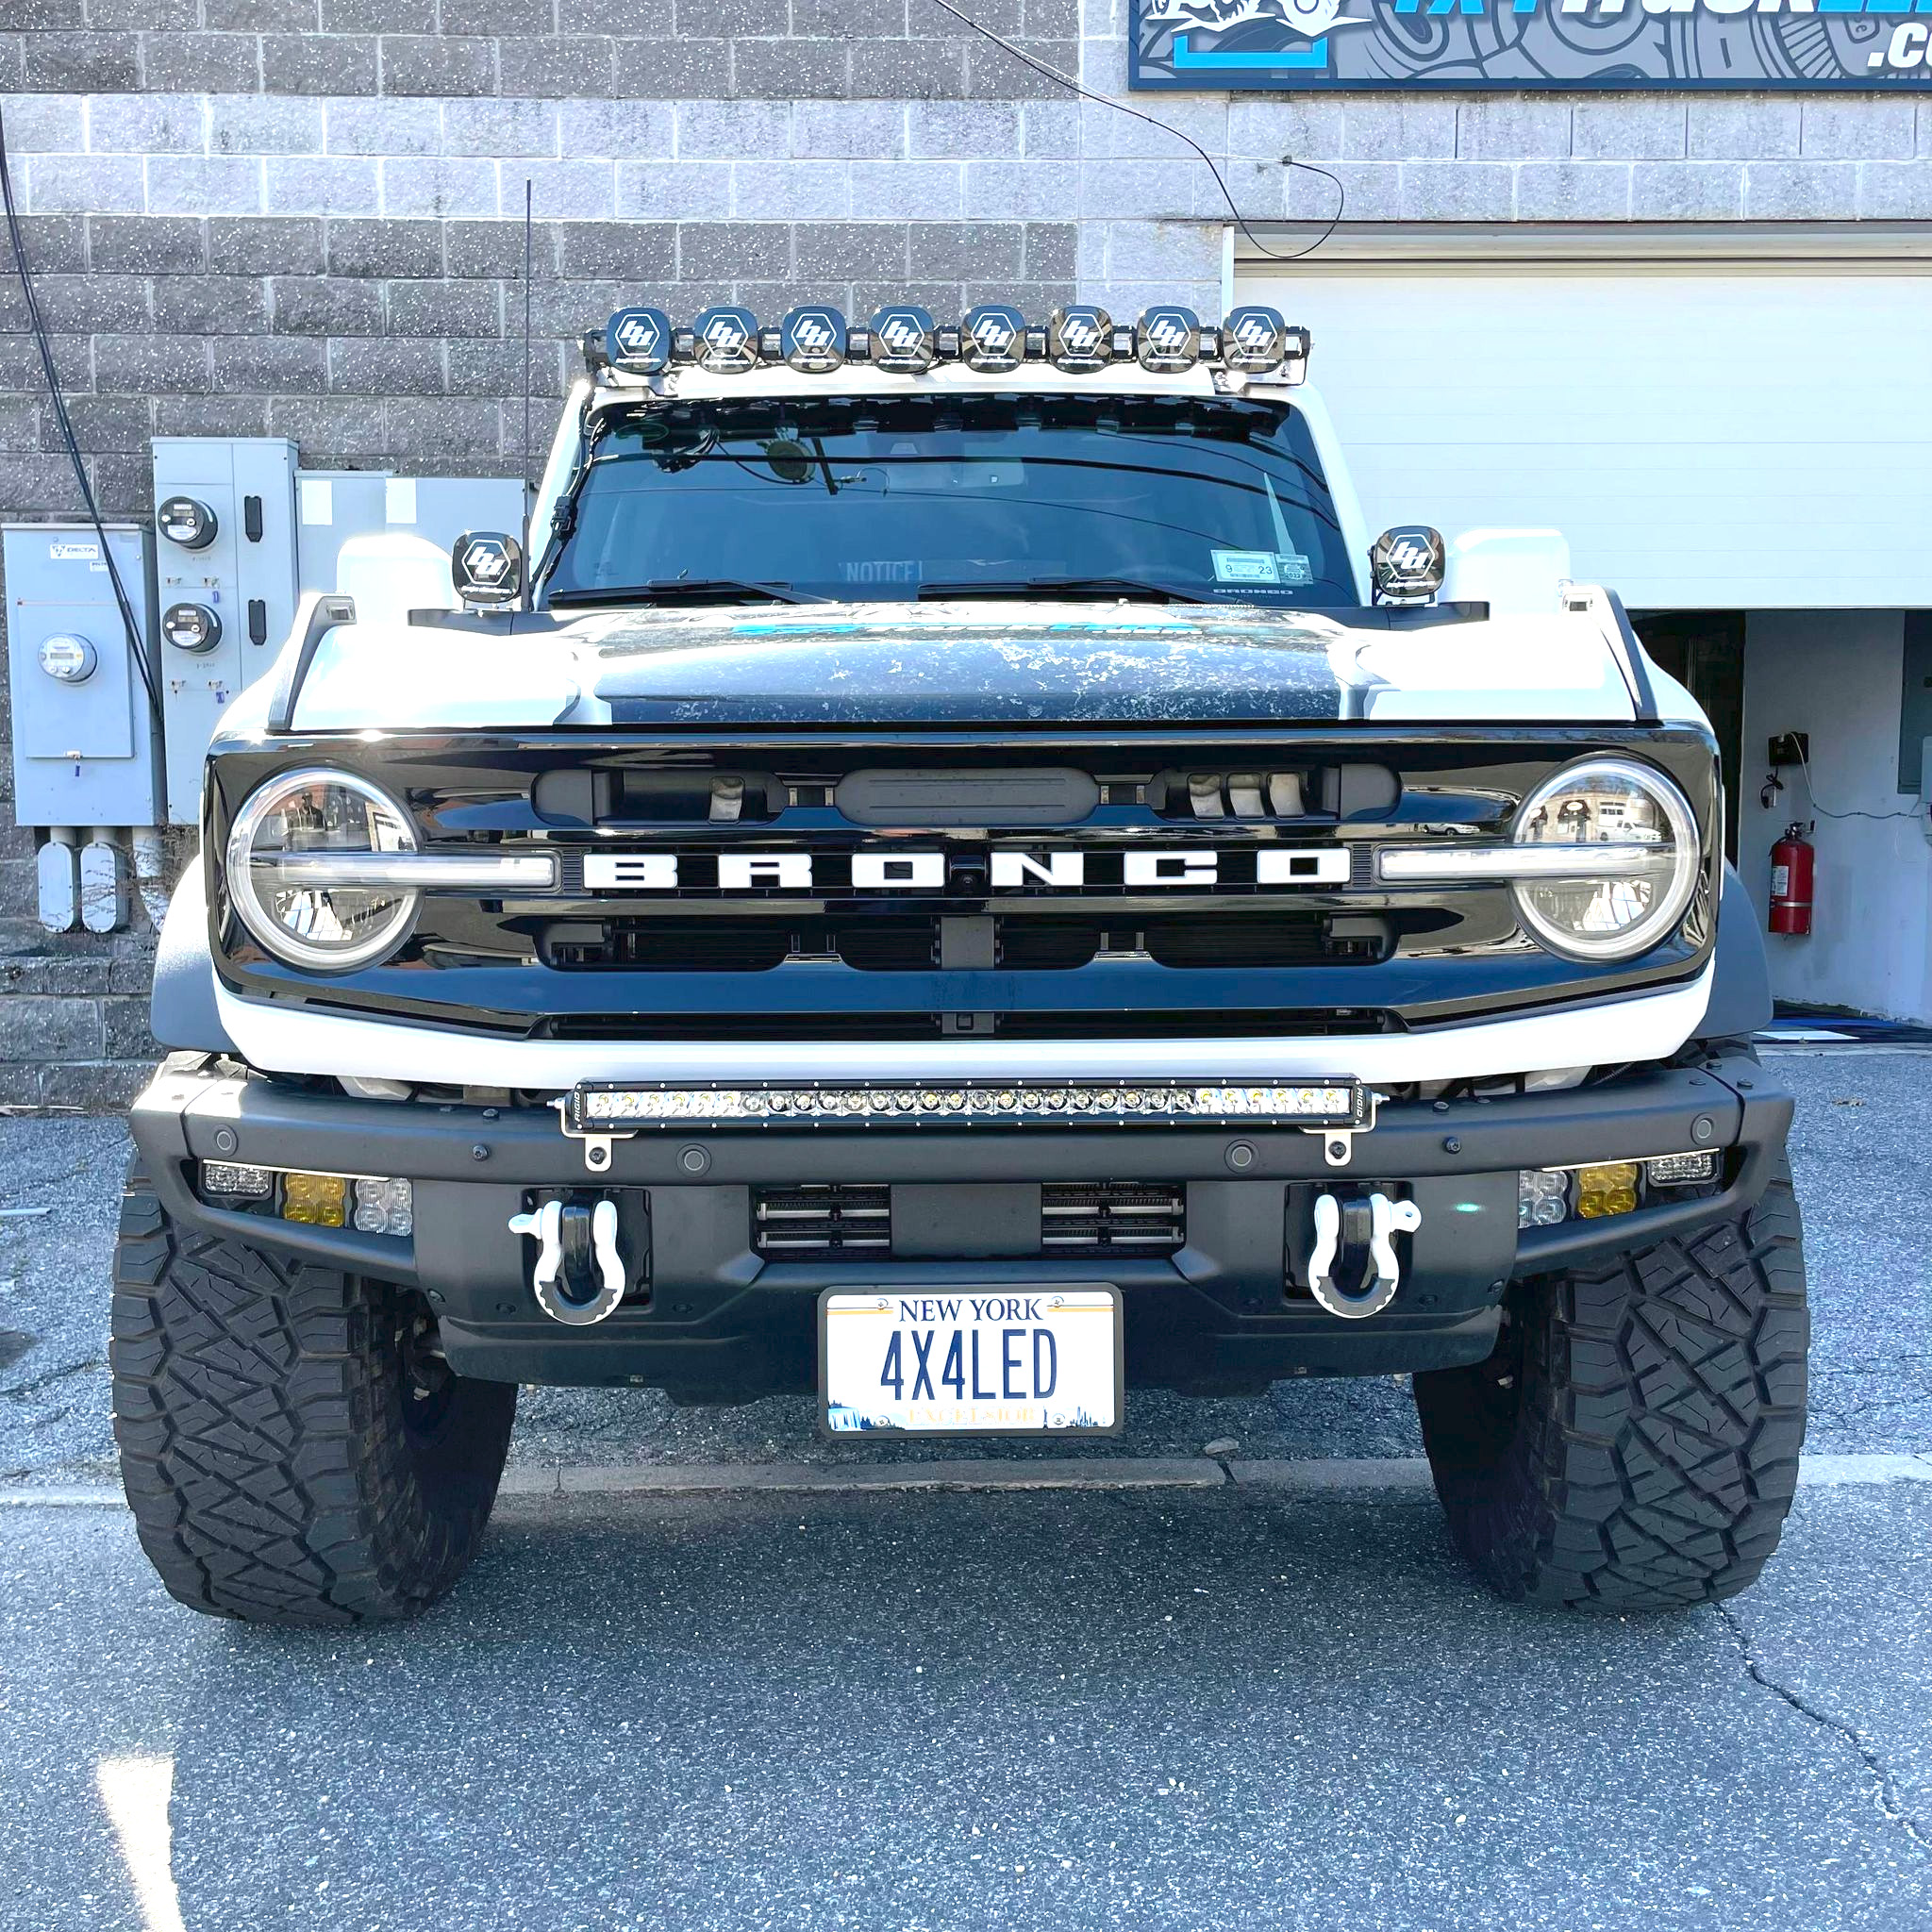 Ford Bronco Now Available: KR Off-Road 30" Light Bar Bumper Mount for 2021+ Ford Bronco Final5